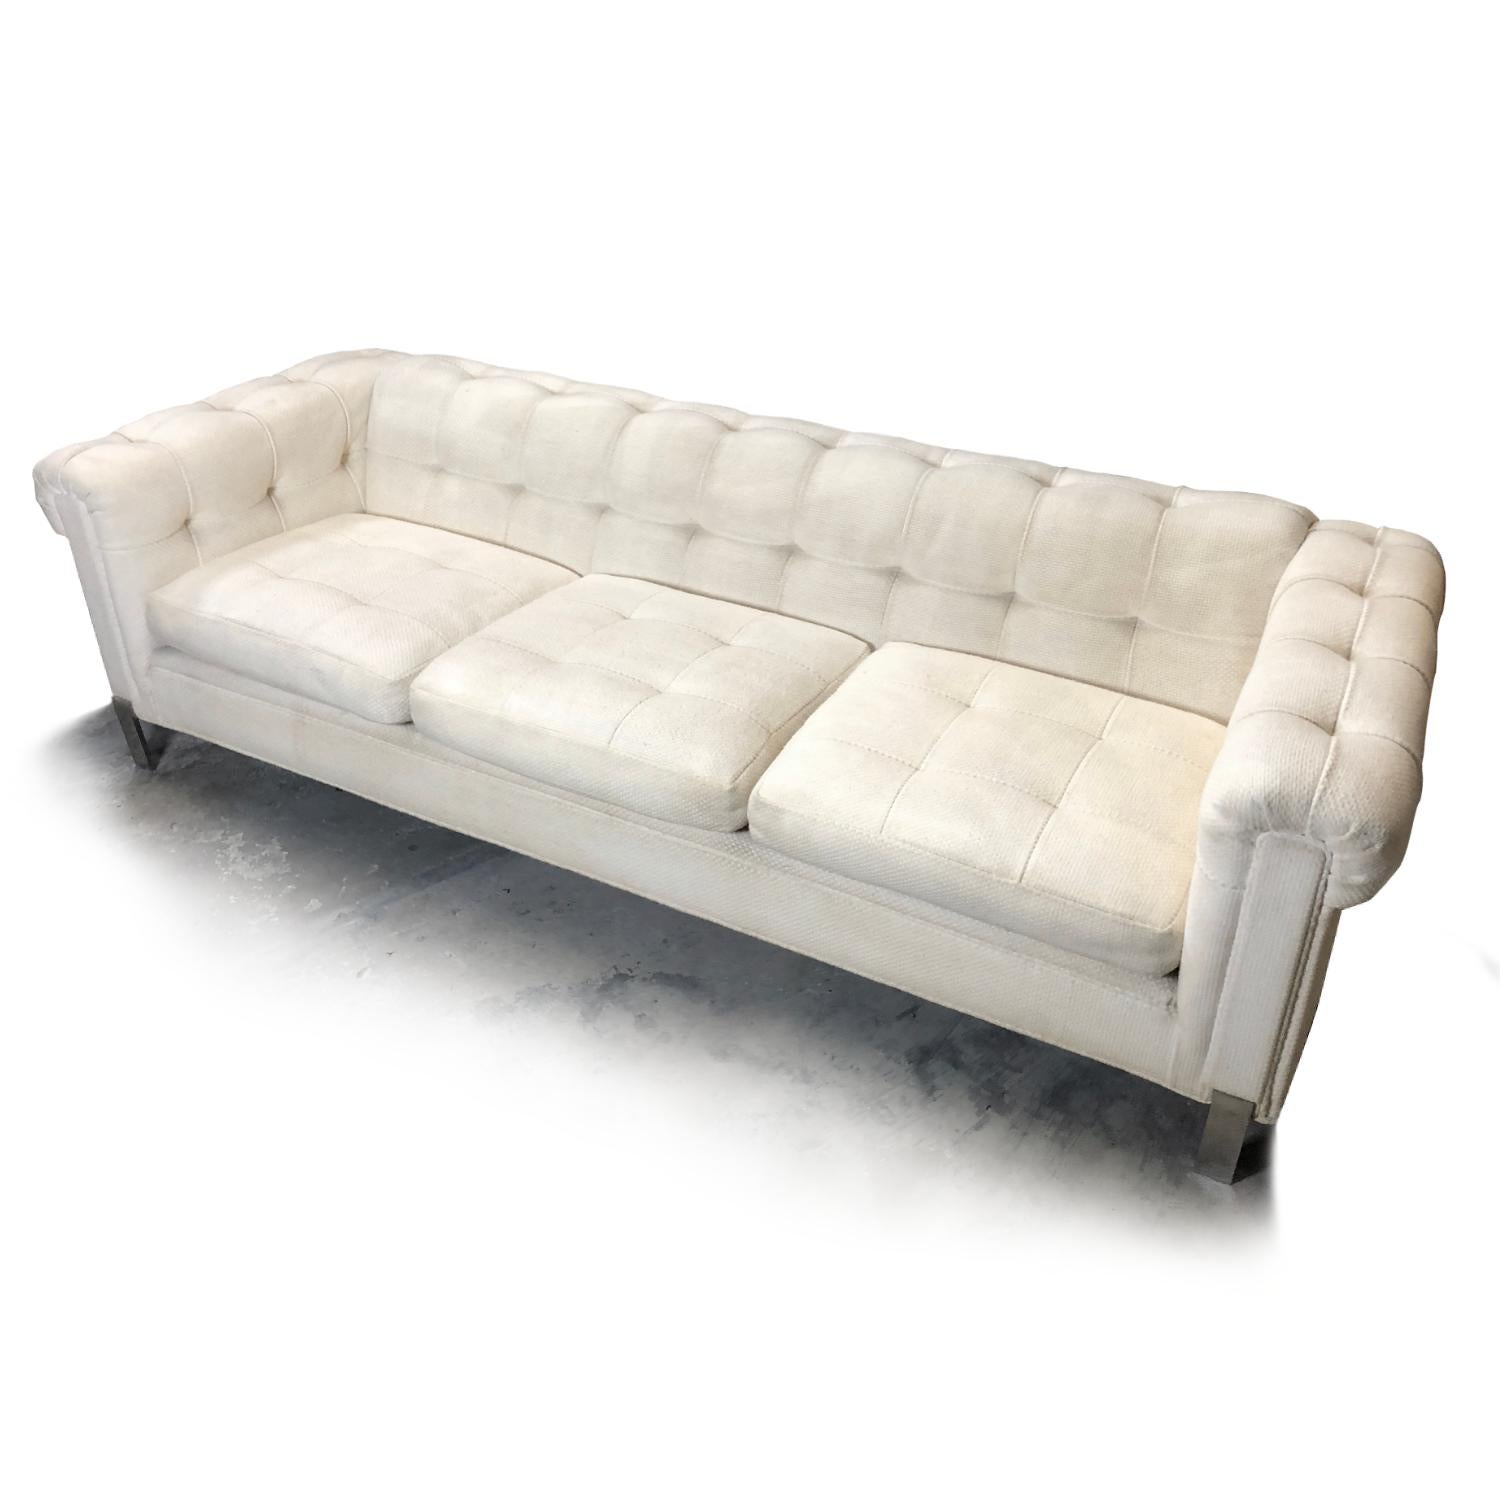 Original Pace Collection white button tufted tuxedo sofa. The vintage 1970s luxury couch features chrome flat bar steel legs. Pace loves to add a little bit of bling. Most of their designs feature gold, chrome, or glass or exotic wood veneers.